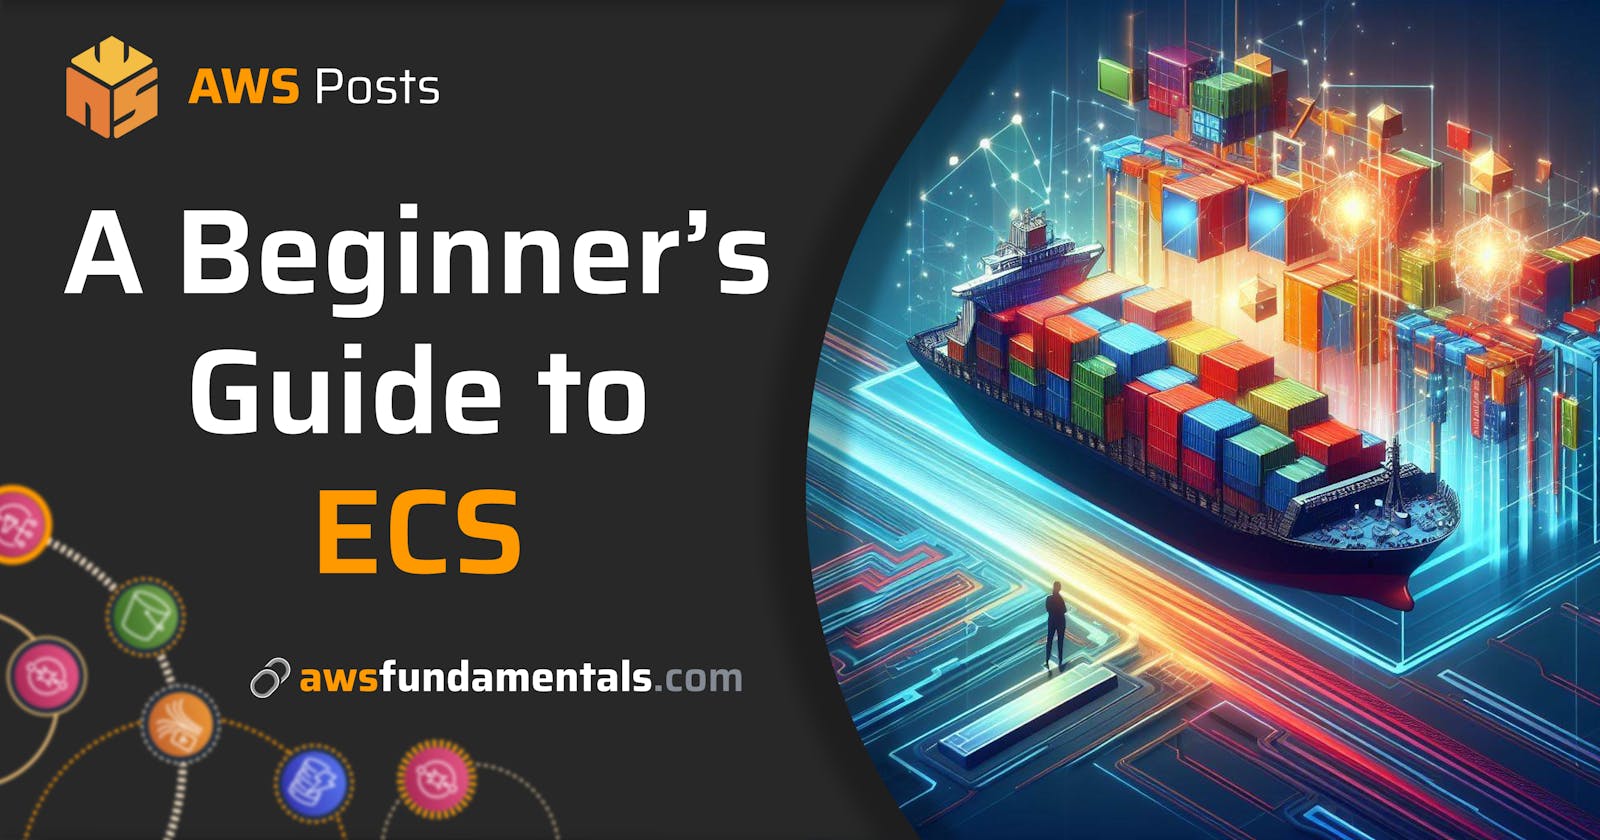 The Ultimate Beginner's Guide to AWS ECS